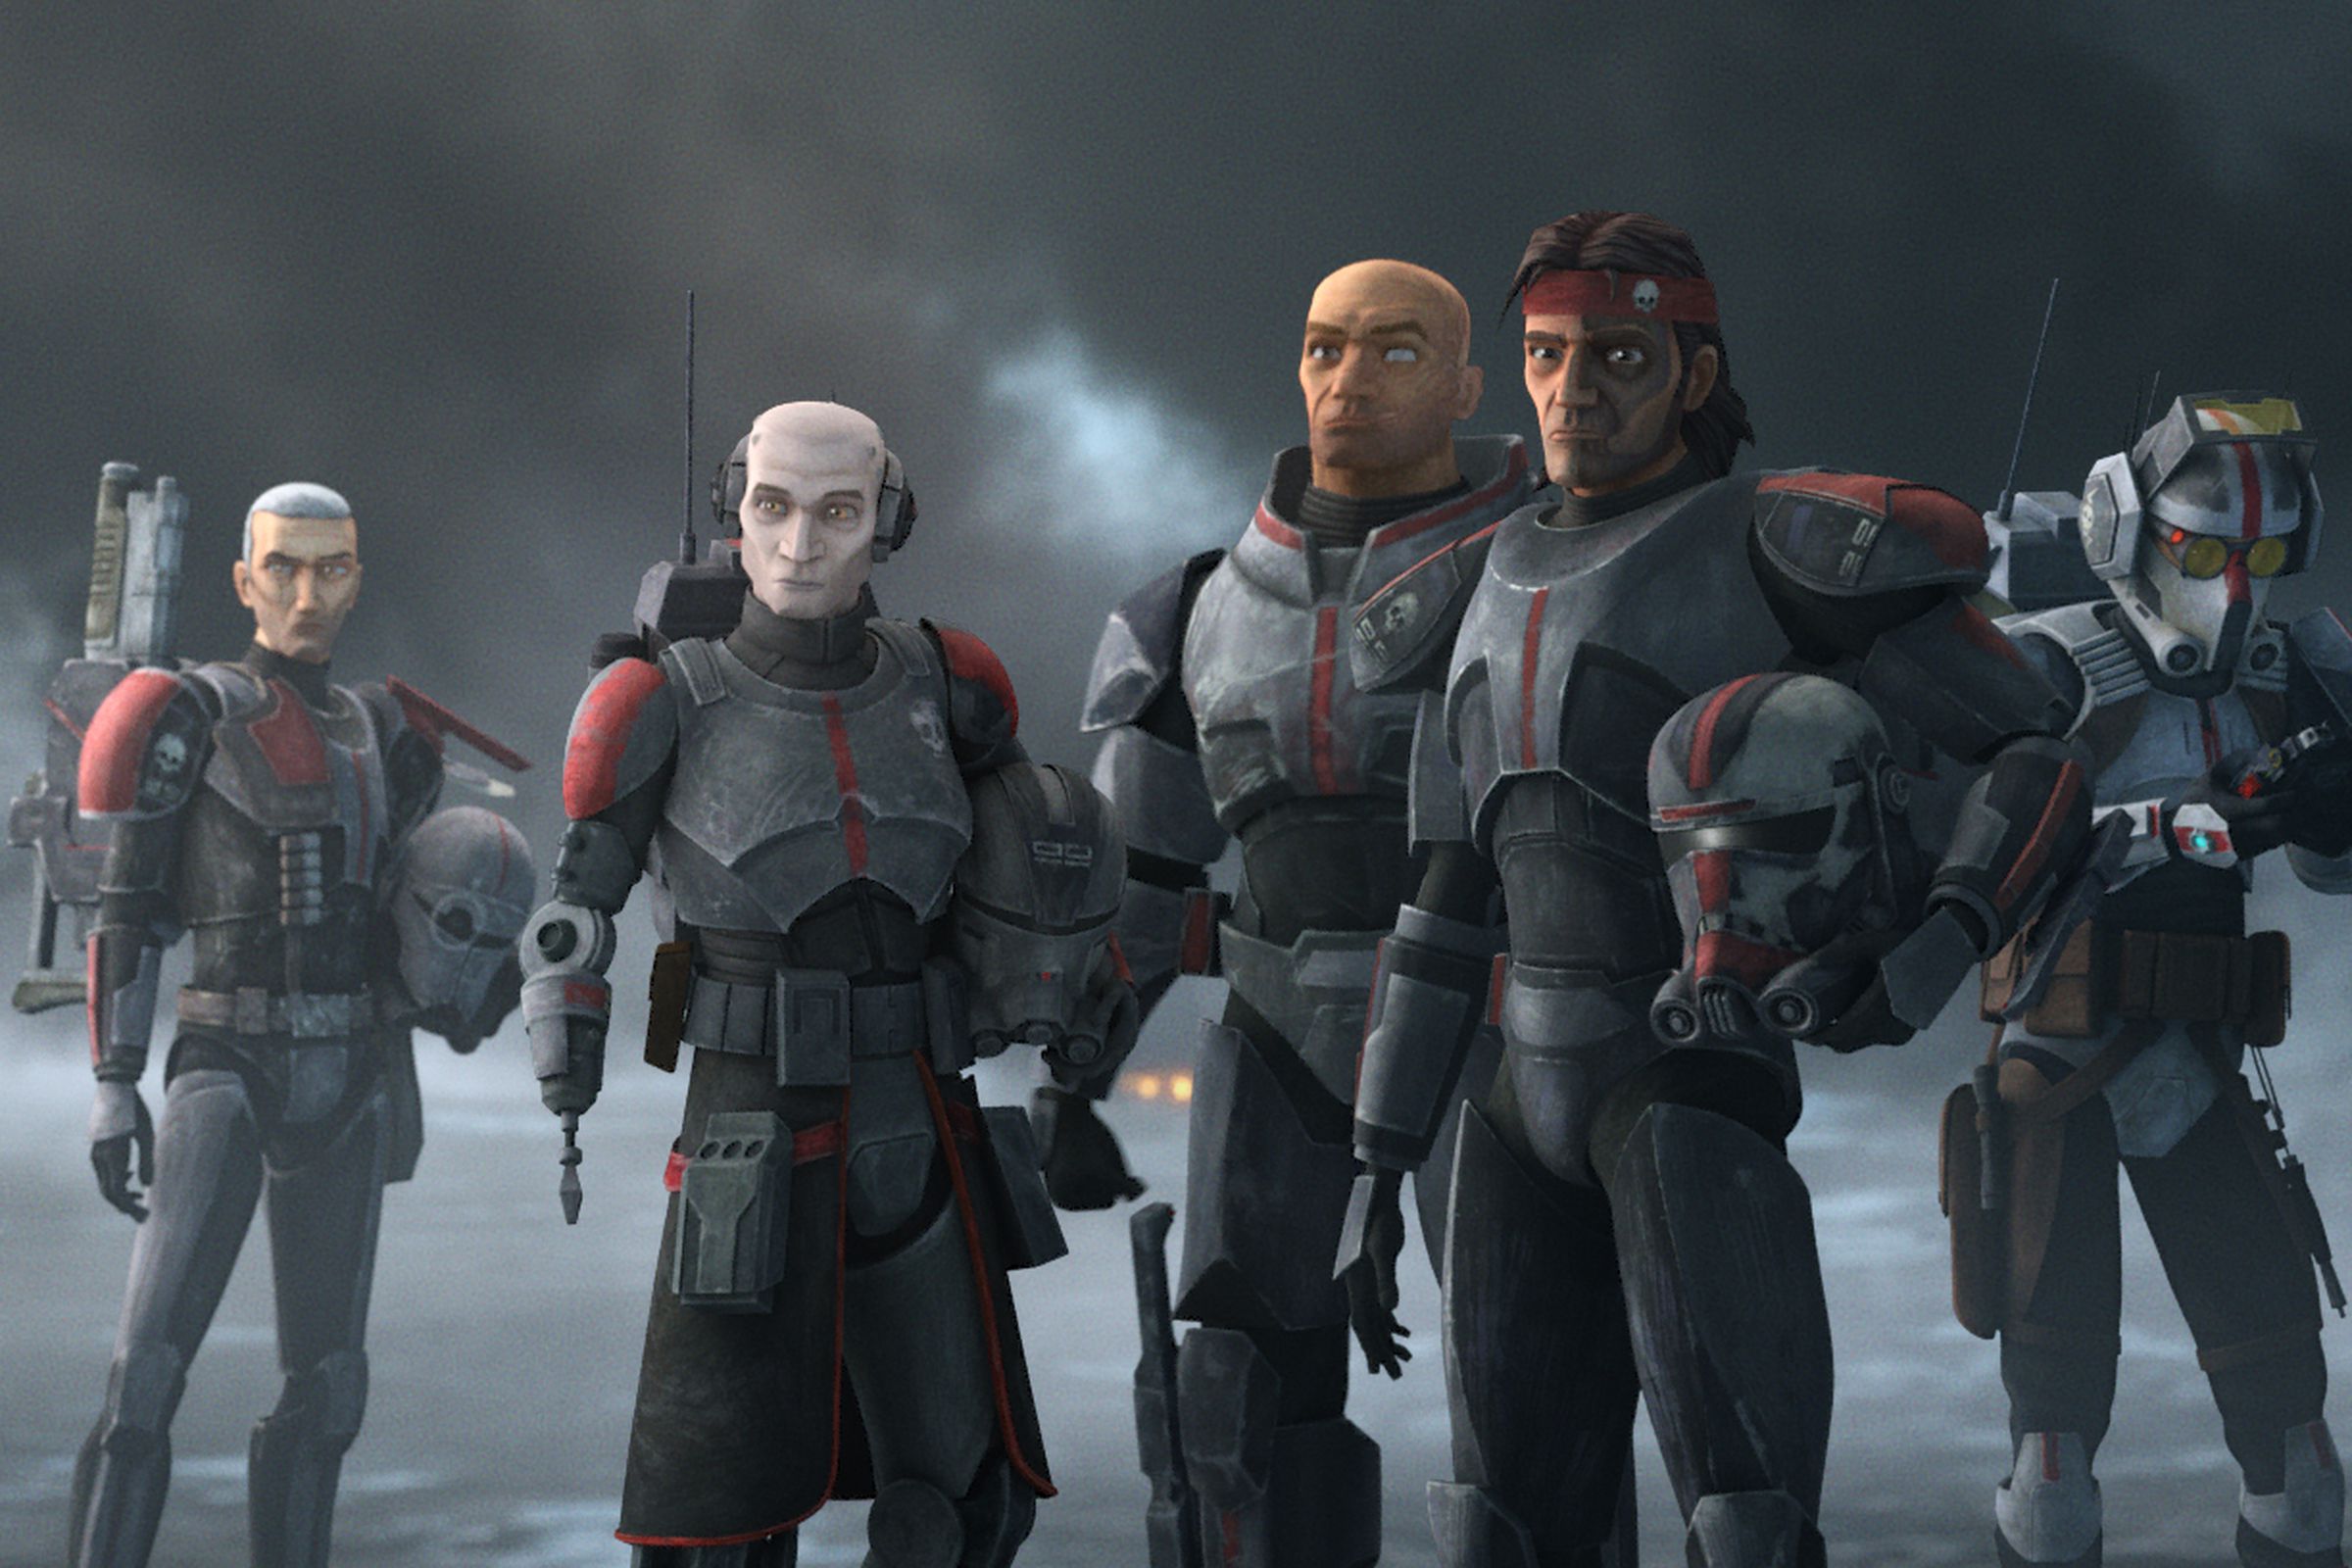 An image showing the members of Clone Force 99